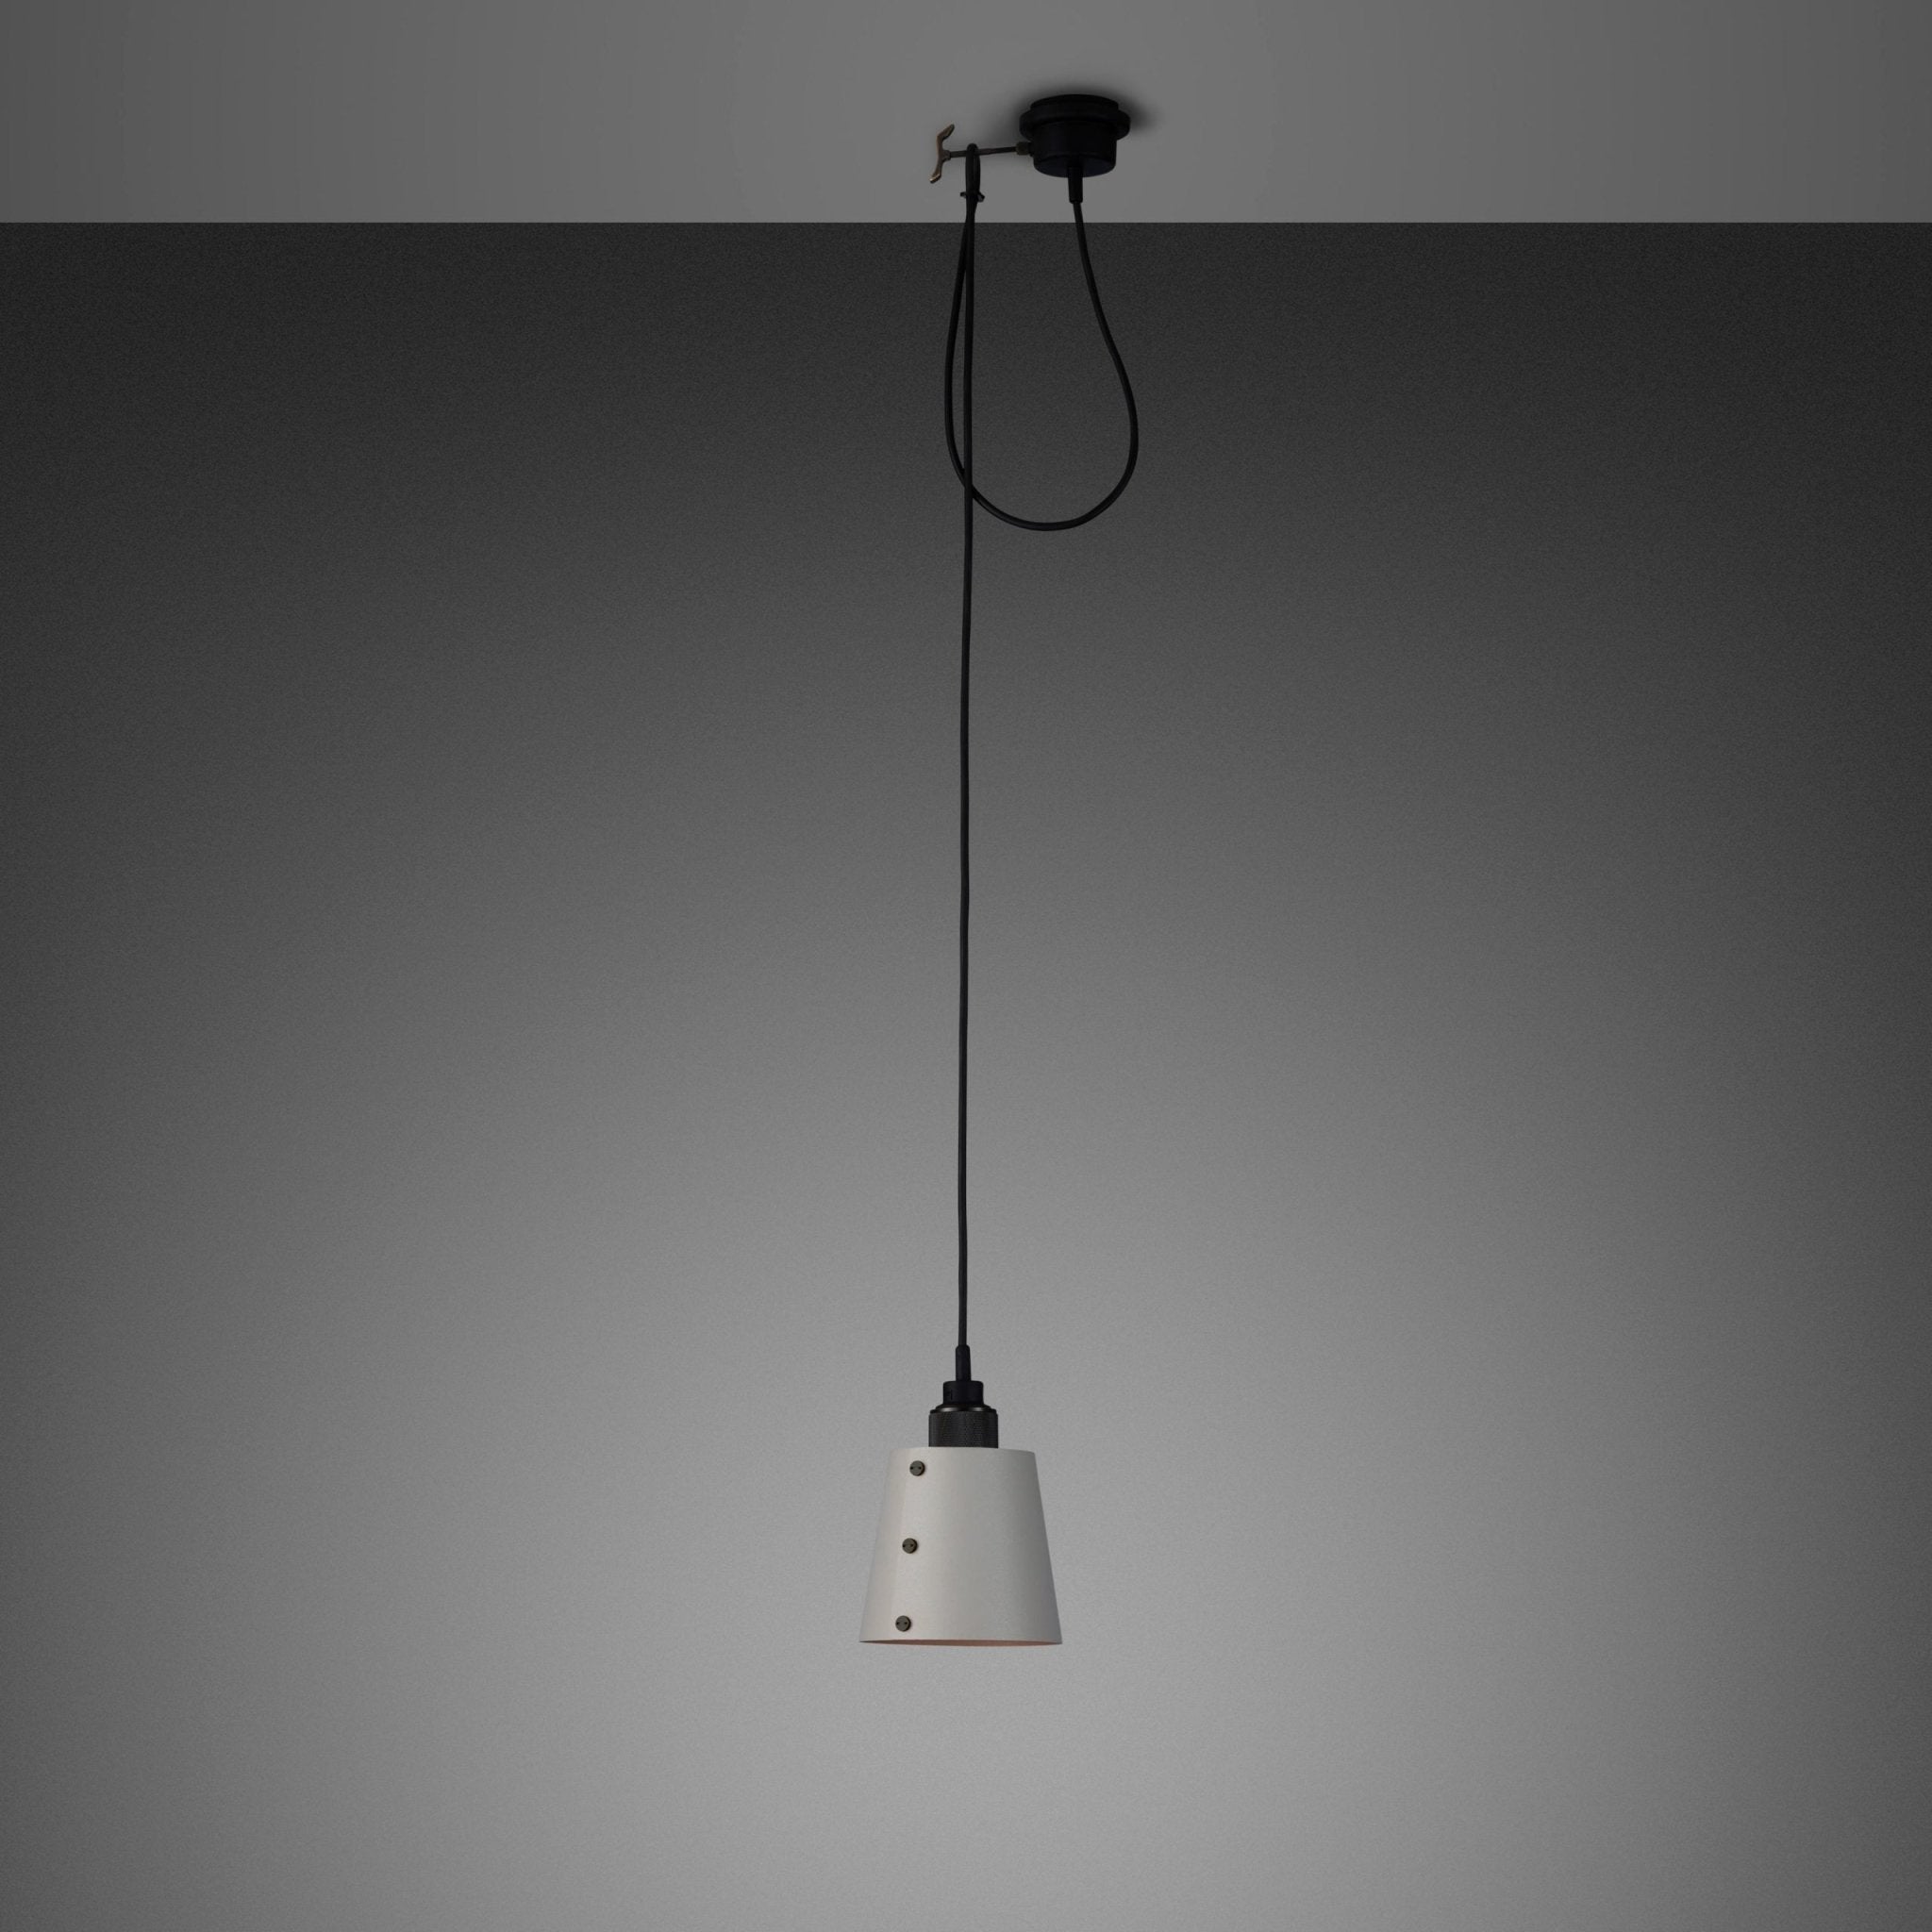 Buster and Punch - Hooked 1.0 / Klein Steen Shade 2.6m Hanglamp